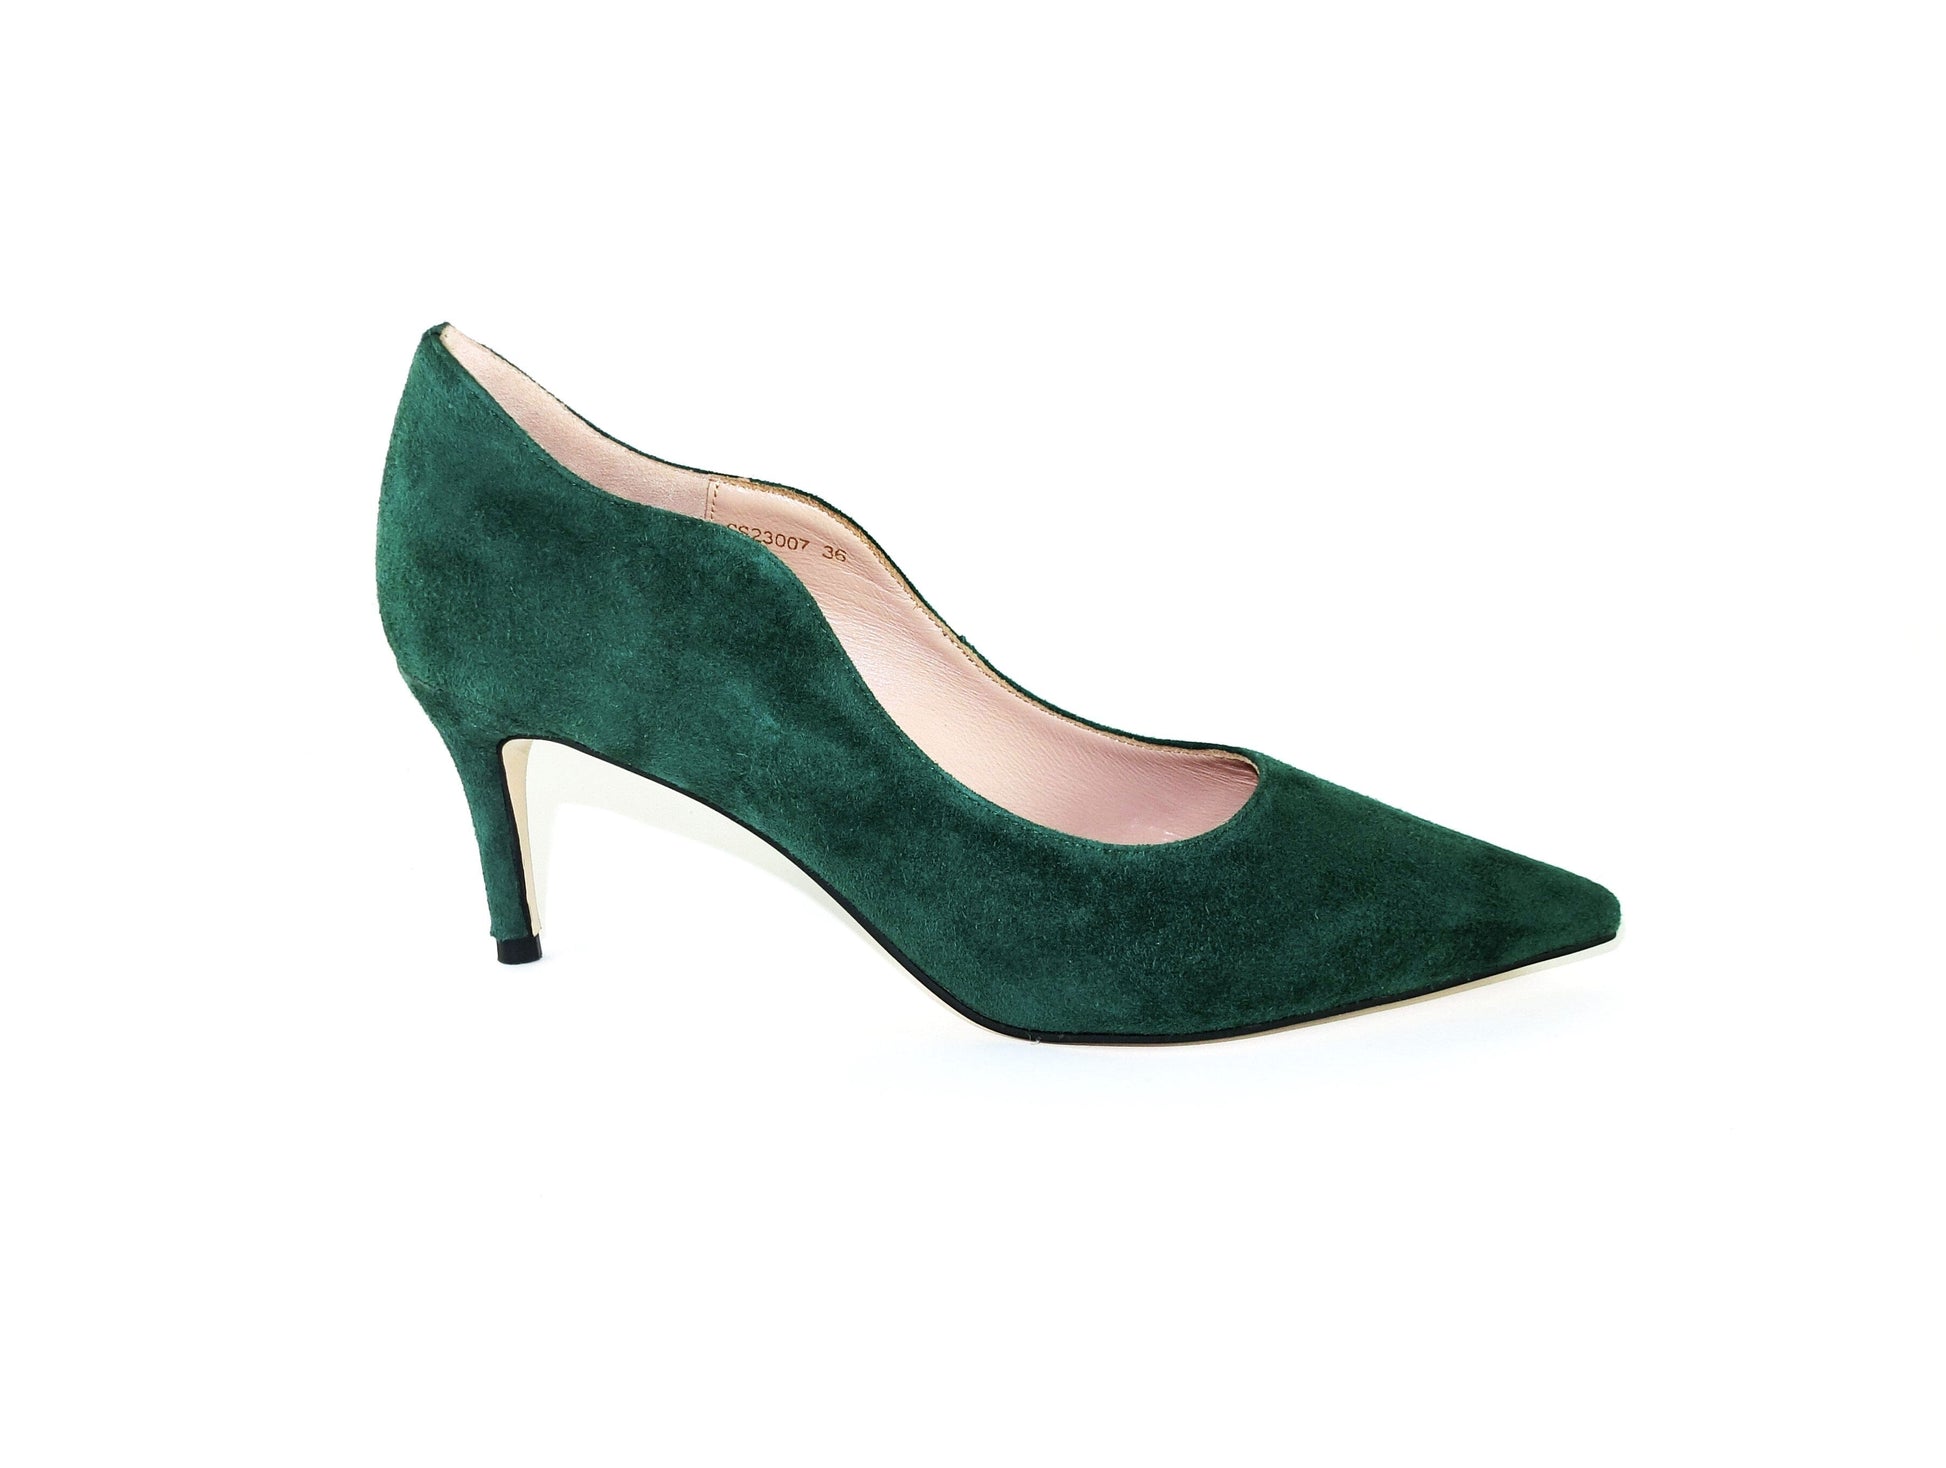 SS23007 Leather court shoes with curve design- Dark green ladies shoes Sam Star shoes Dark green 37/4 